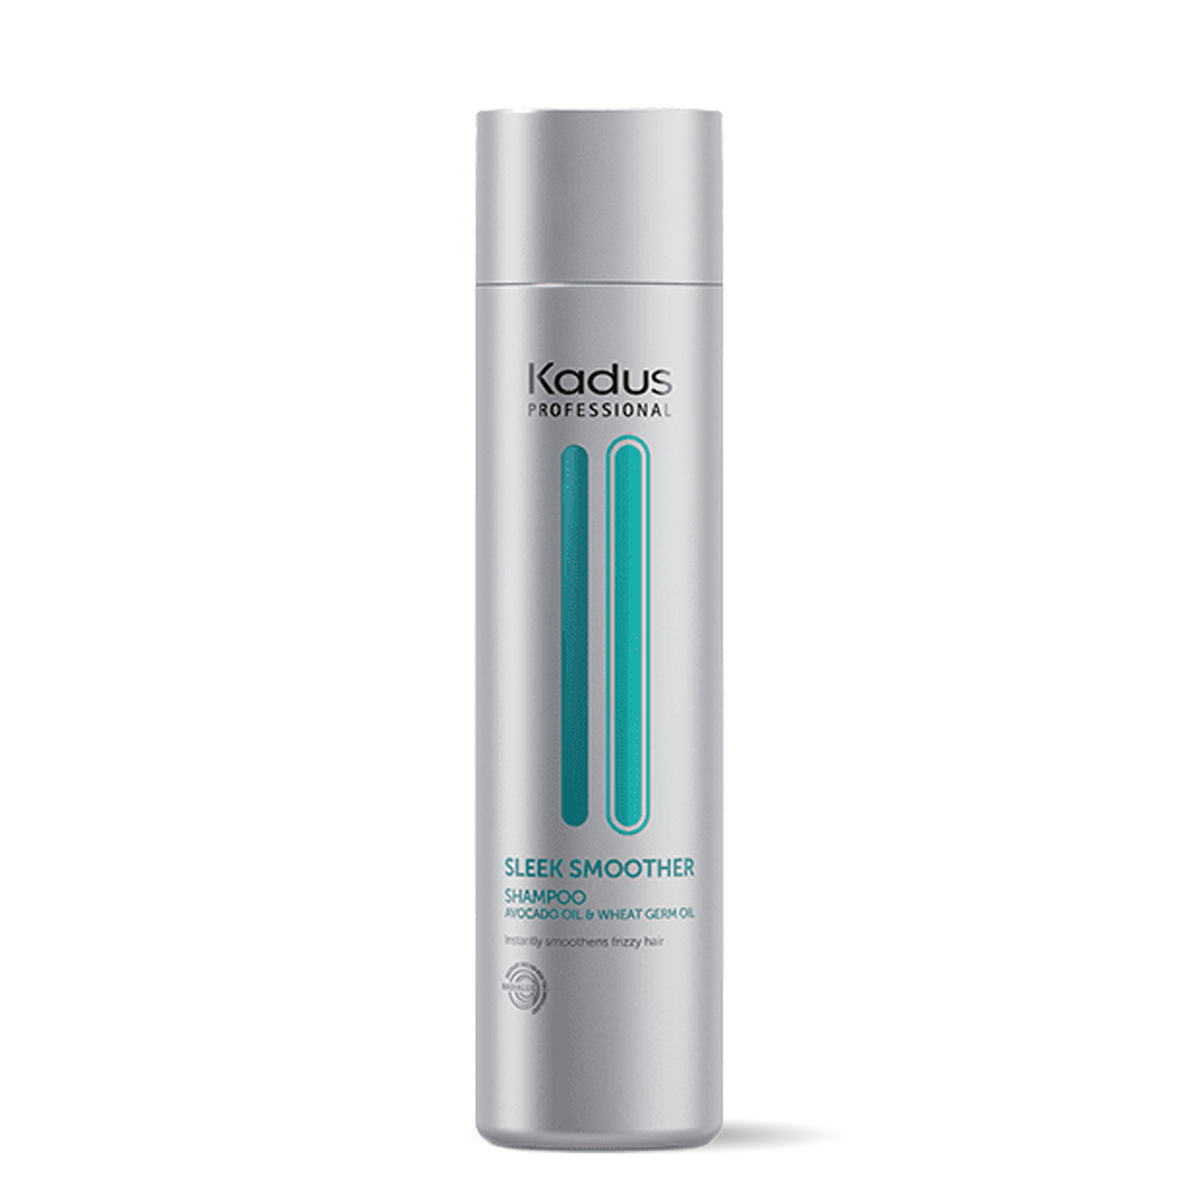 Kadus Sleek Smoother Shampoo 250ml - by Kadus Professionals |ProCare Outlet|